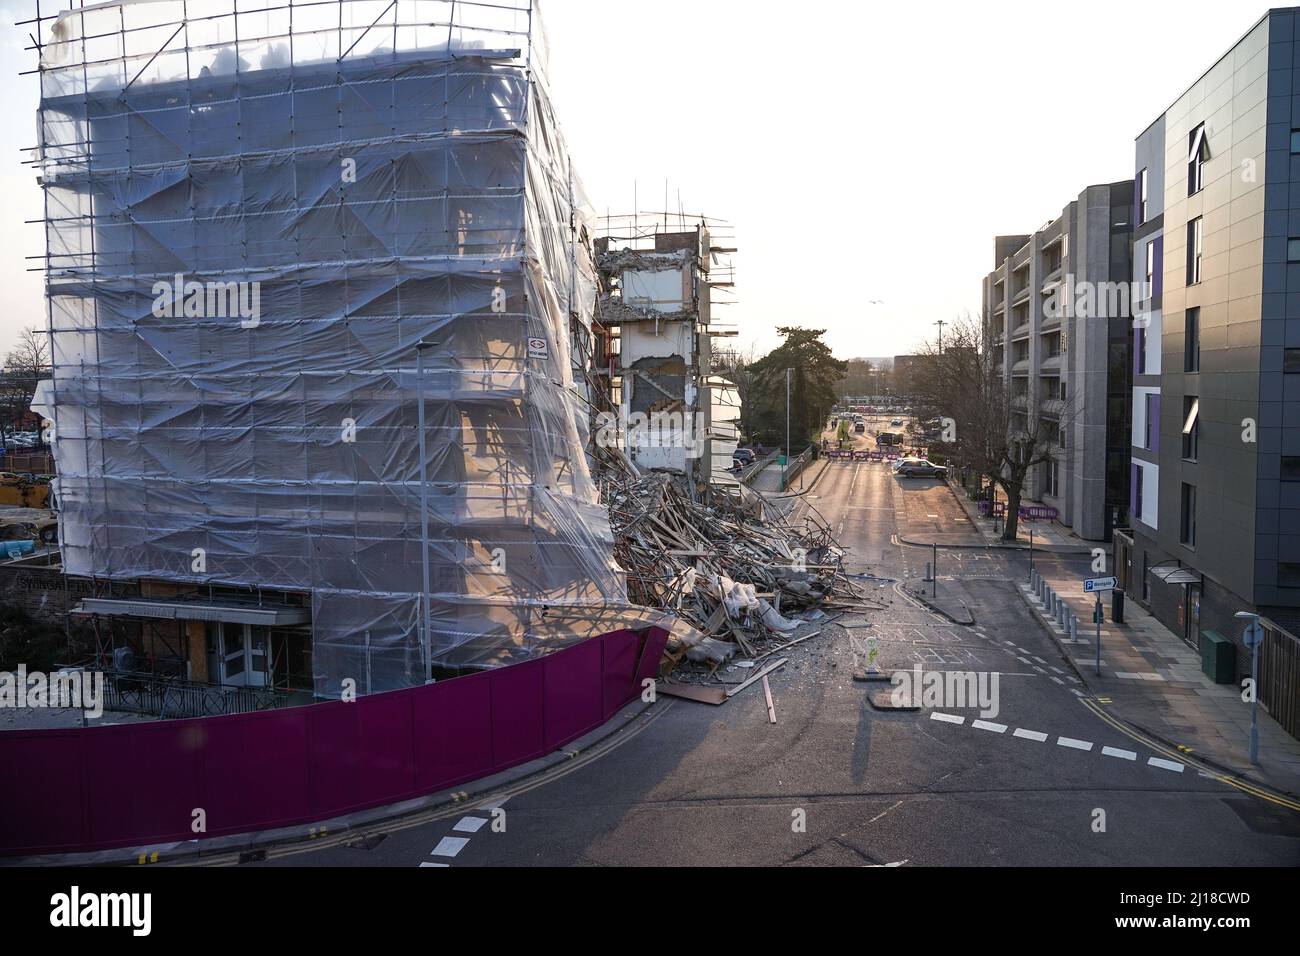 Part of a building in Stevenage collapsed whilst being demolished, leaving debris blocking the street below Stock Photo